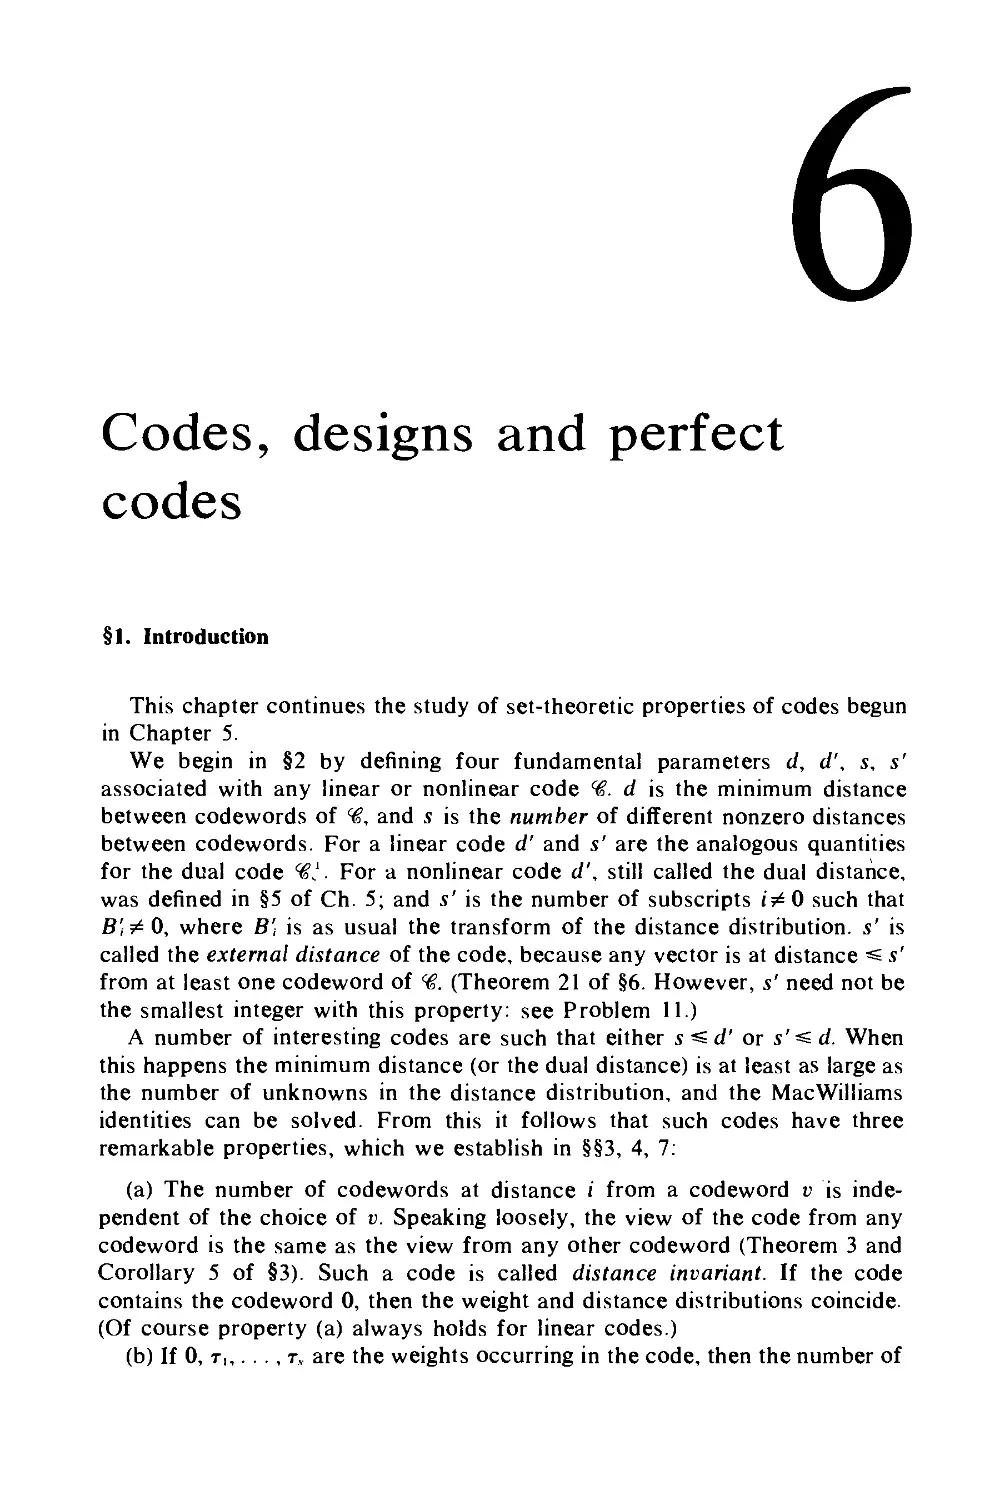 6. Codes, designs and perfectcodes